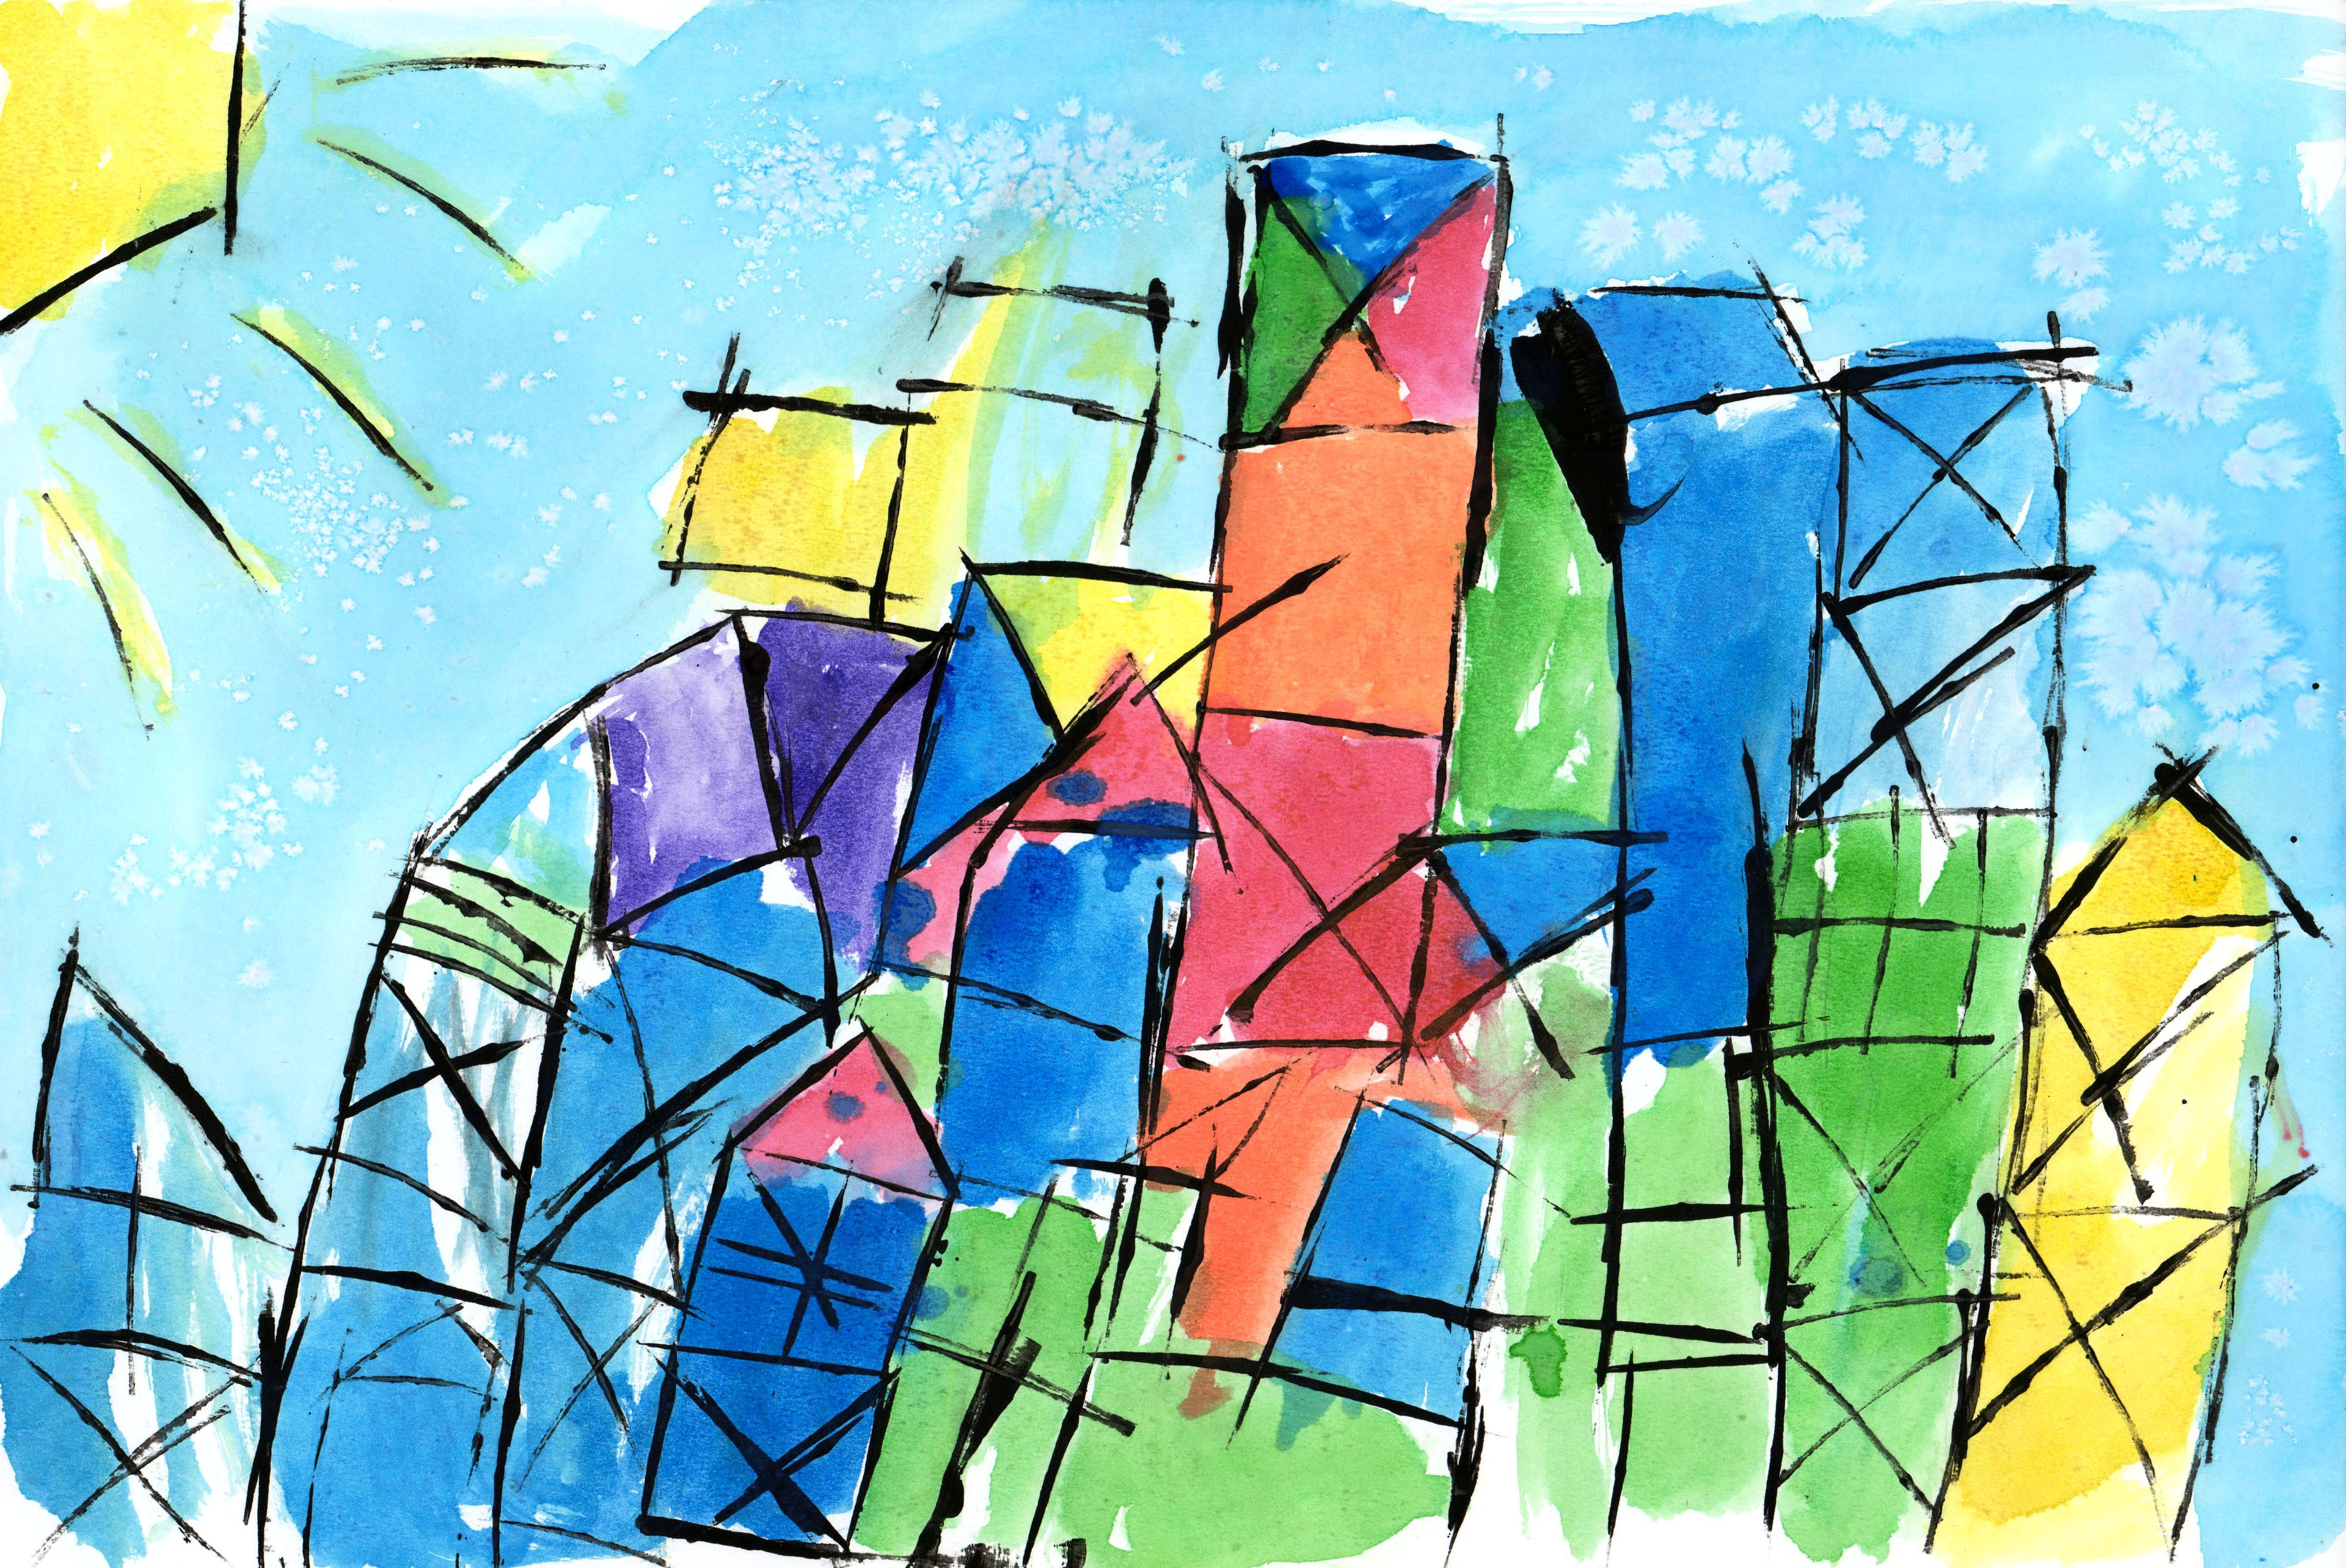 Painting of the New York City skyline, represented with abstract, geometric black outlined strokes, created with cardboard stamping, watercolor, and coarse salt. The buildings are painted in various colors including blue, green, red, orange, and yellow. The sky is blue and a yellow sun with yellow rays shines upon the city from the top left corner of the image.